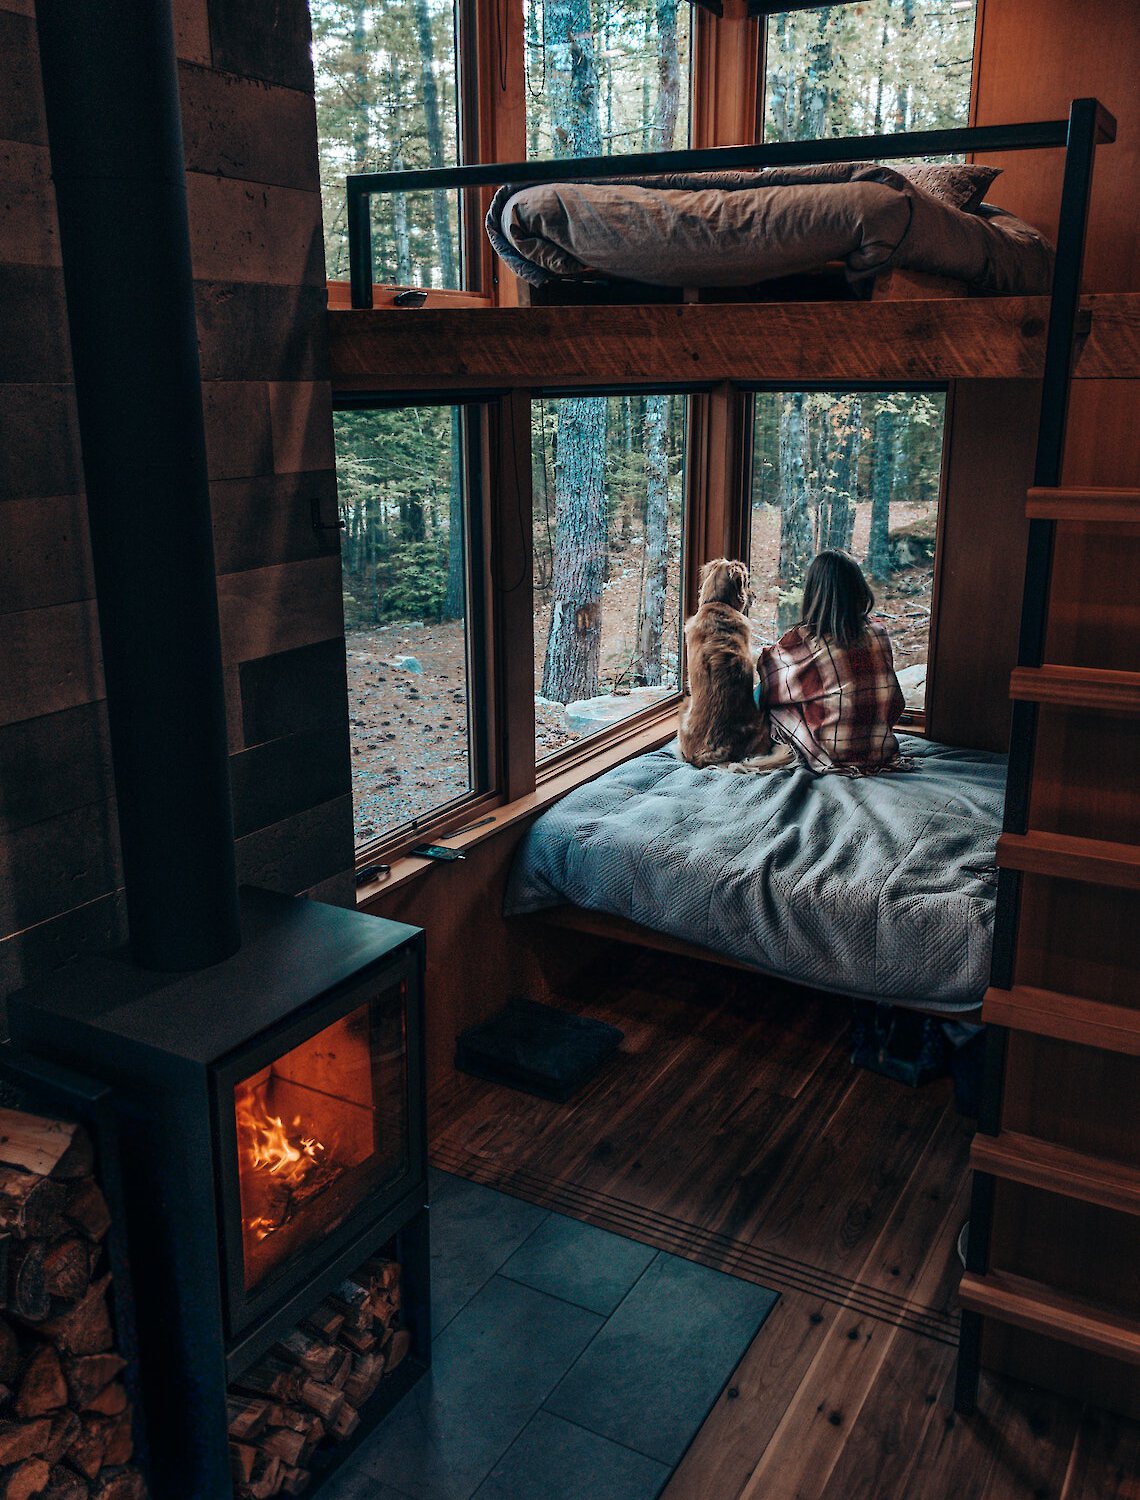 Owner and dog cozy in cabin together